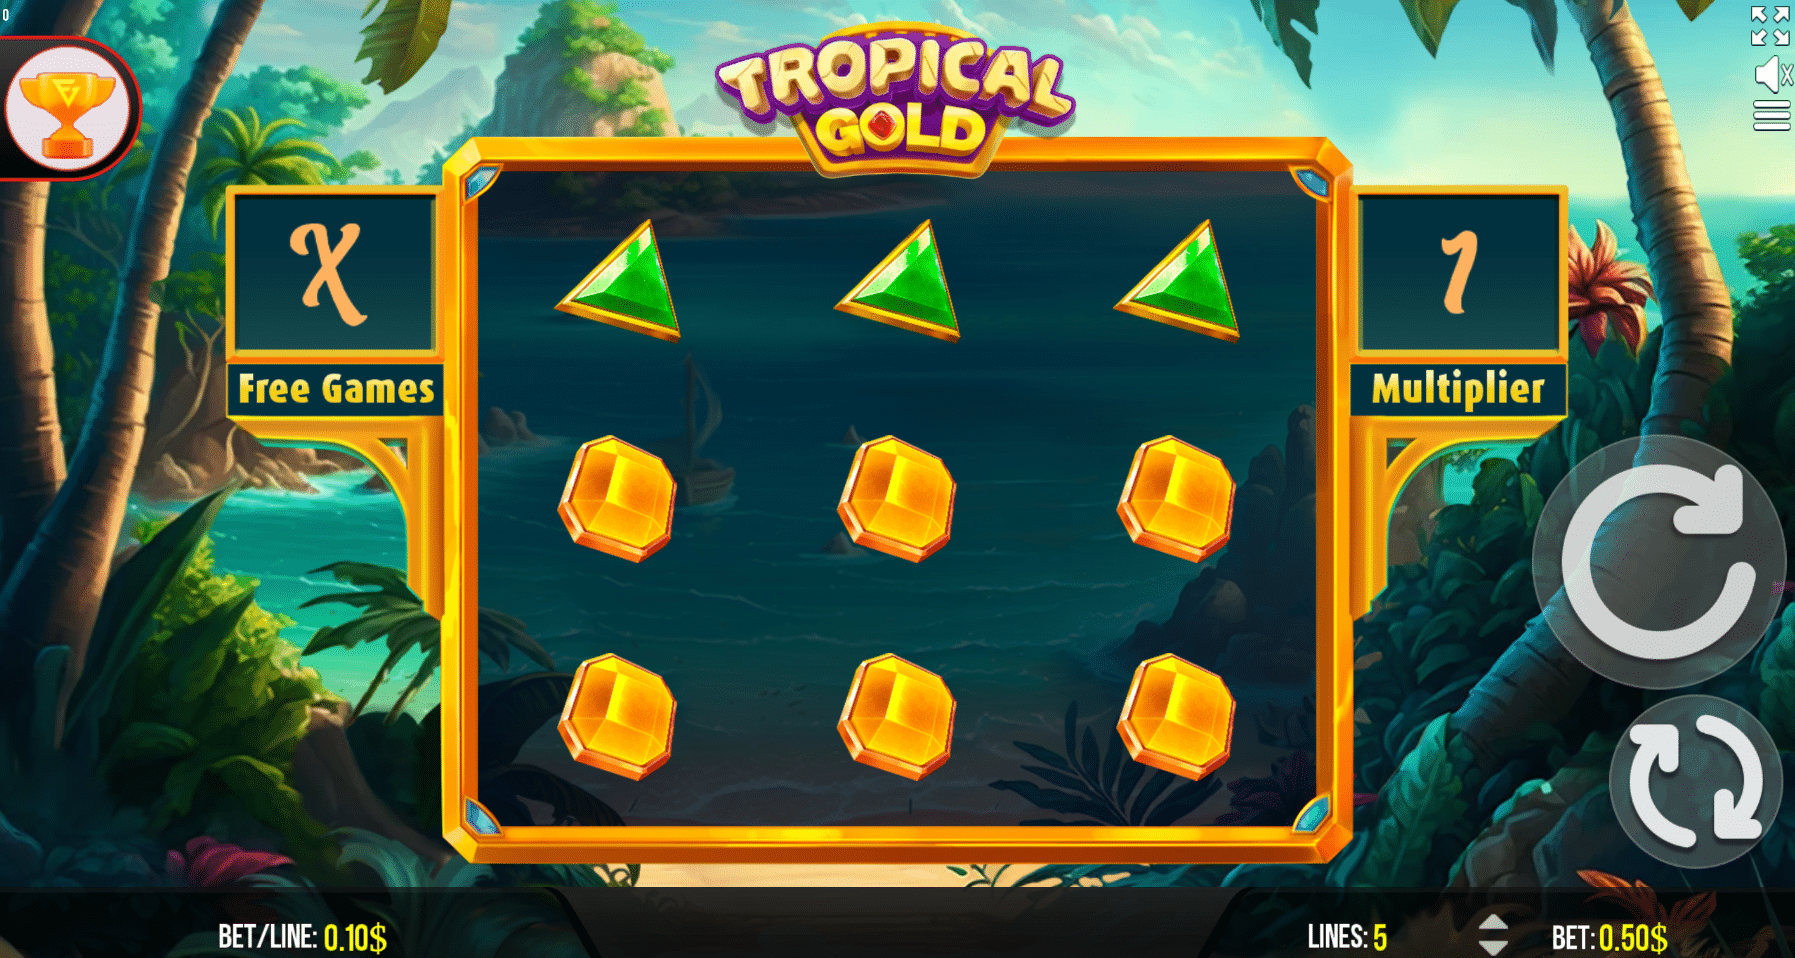 Tropical Gold